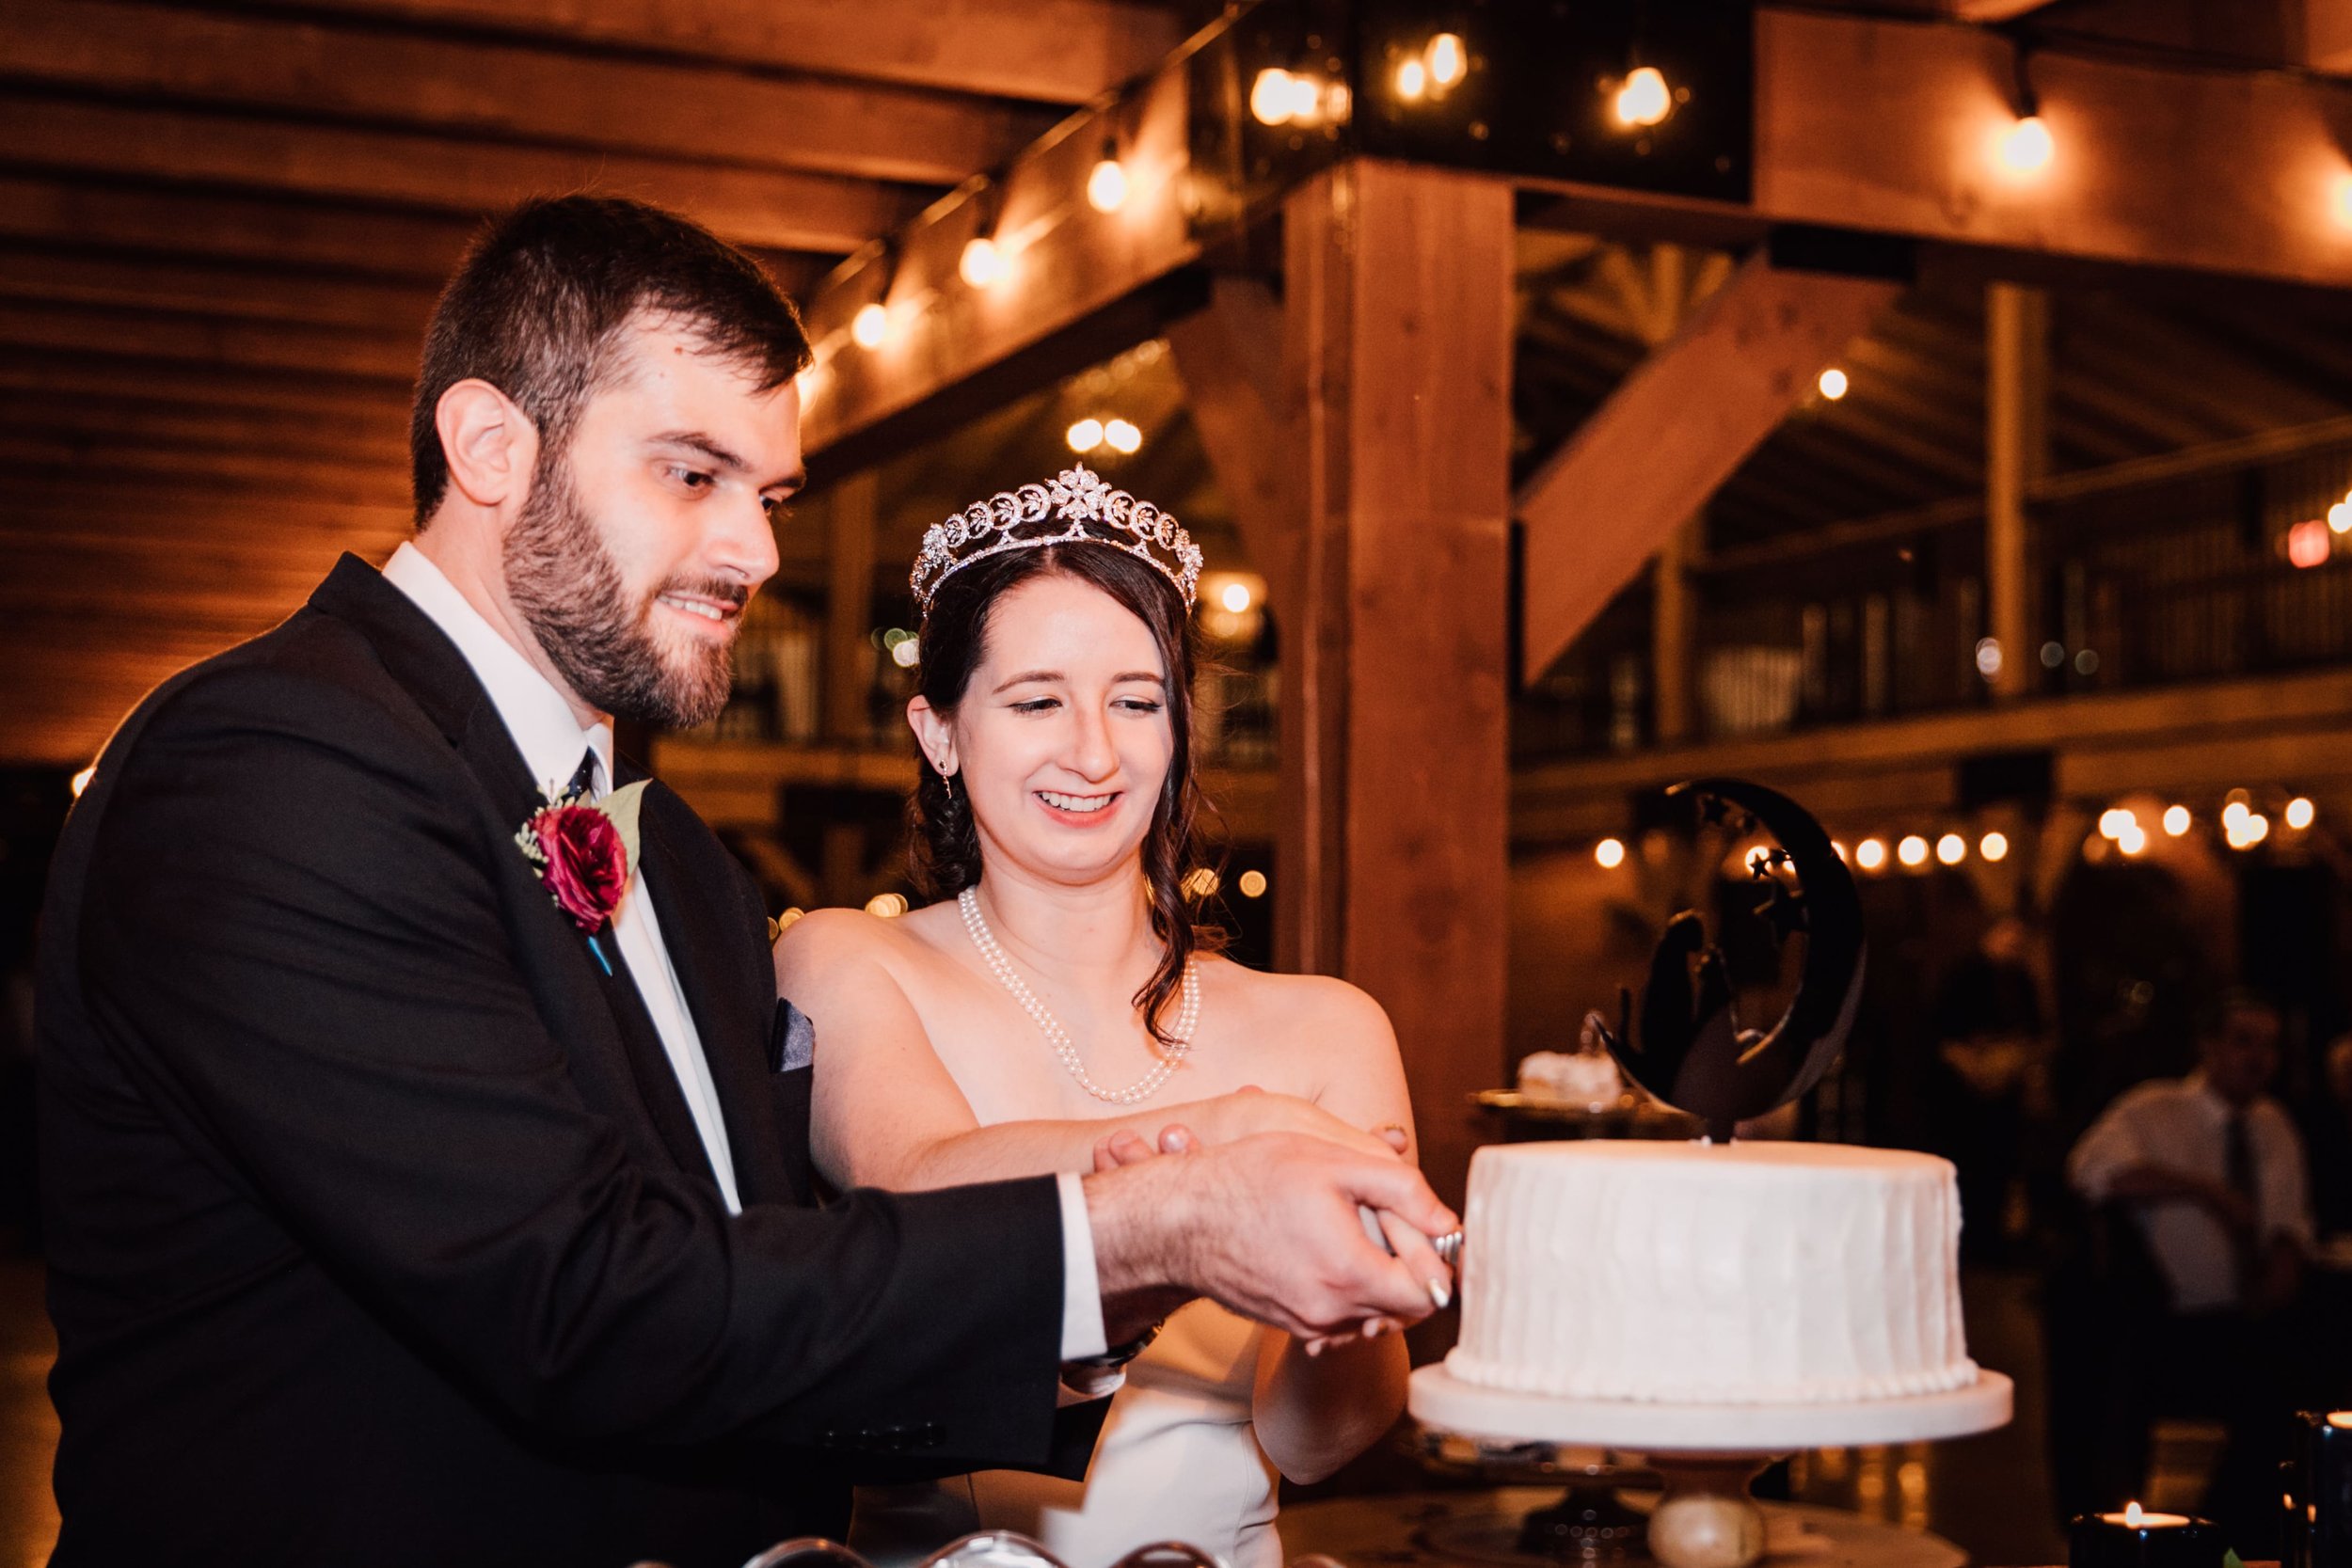  the bride and groom smile as they cut their celestial wedding cake 